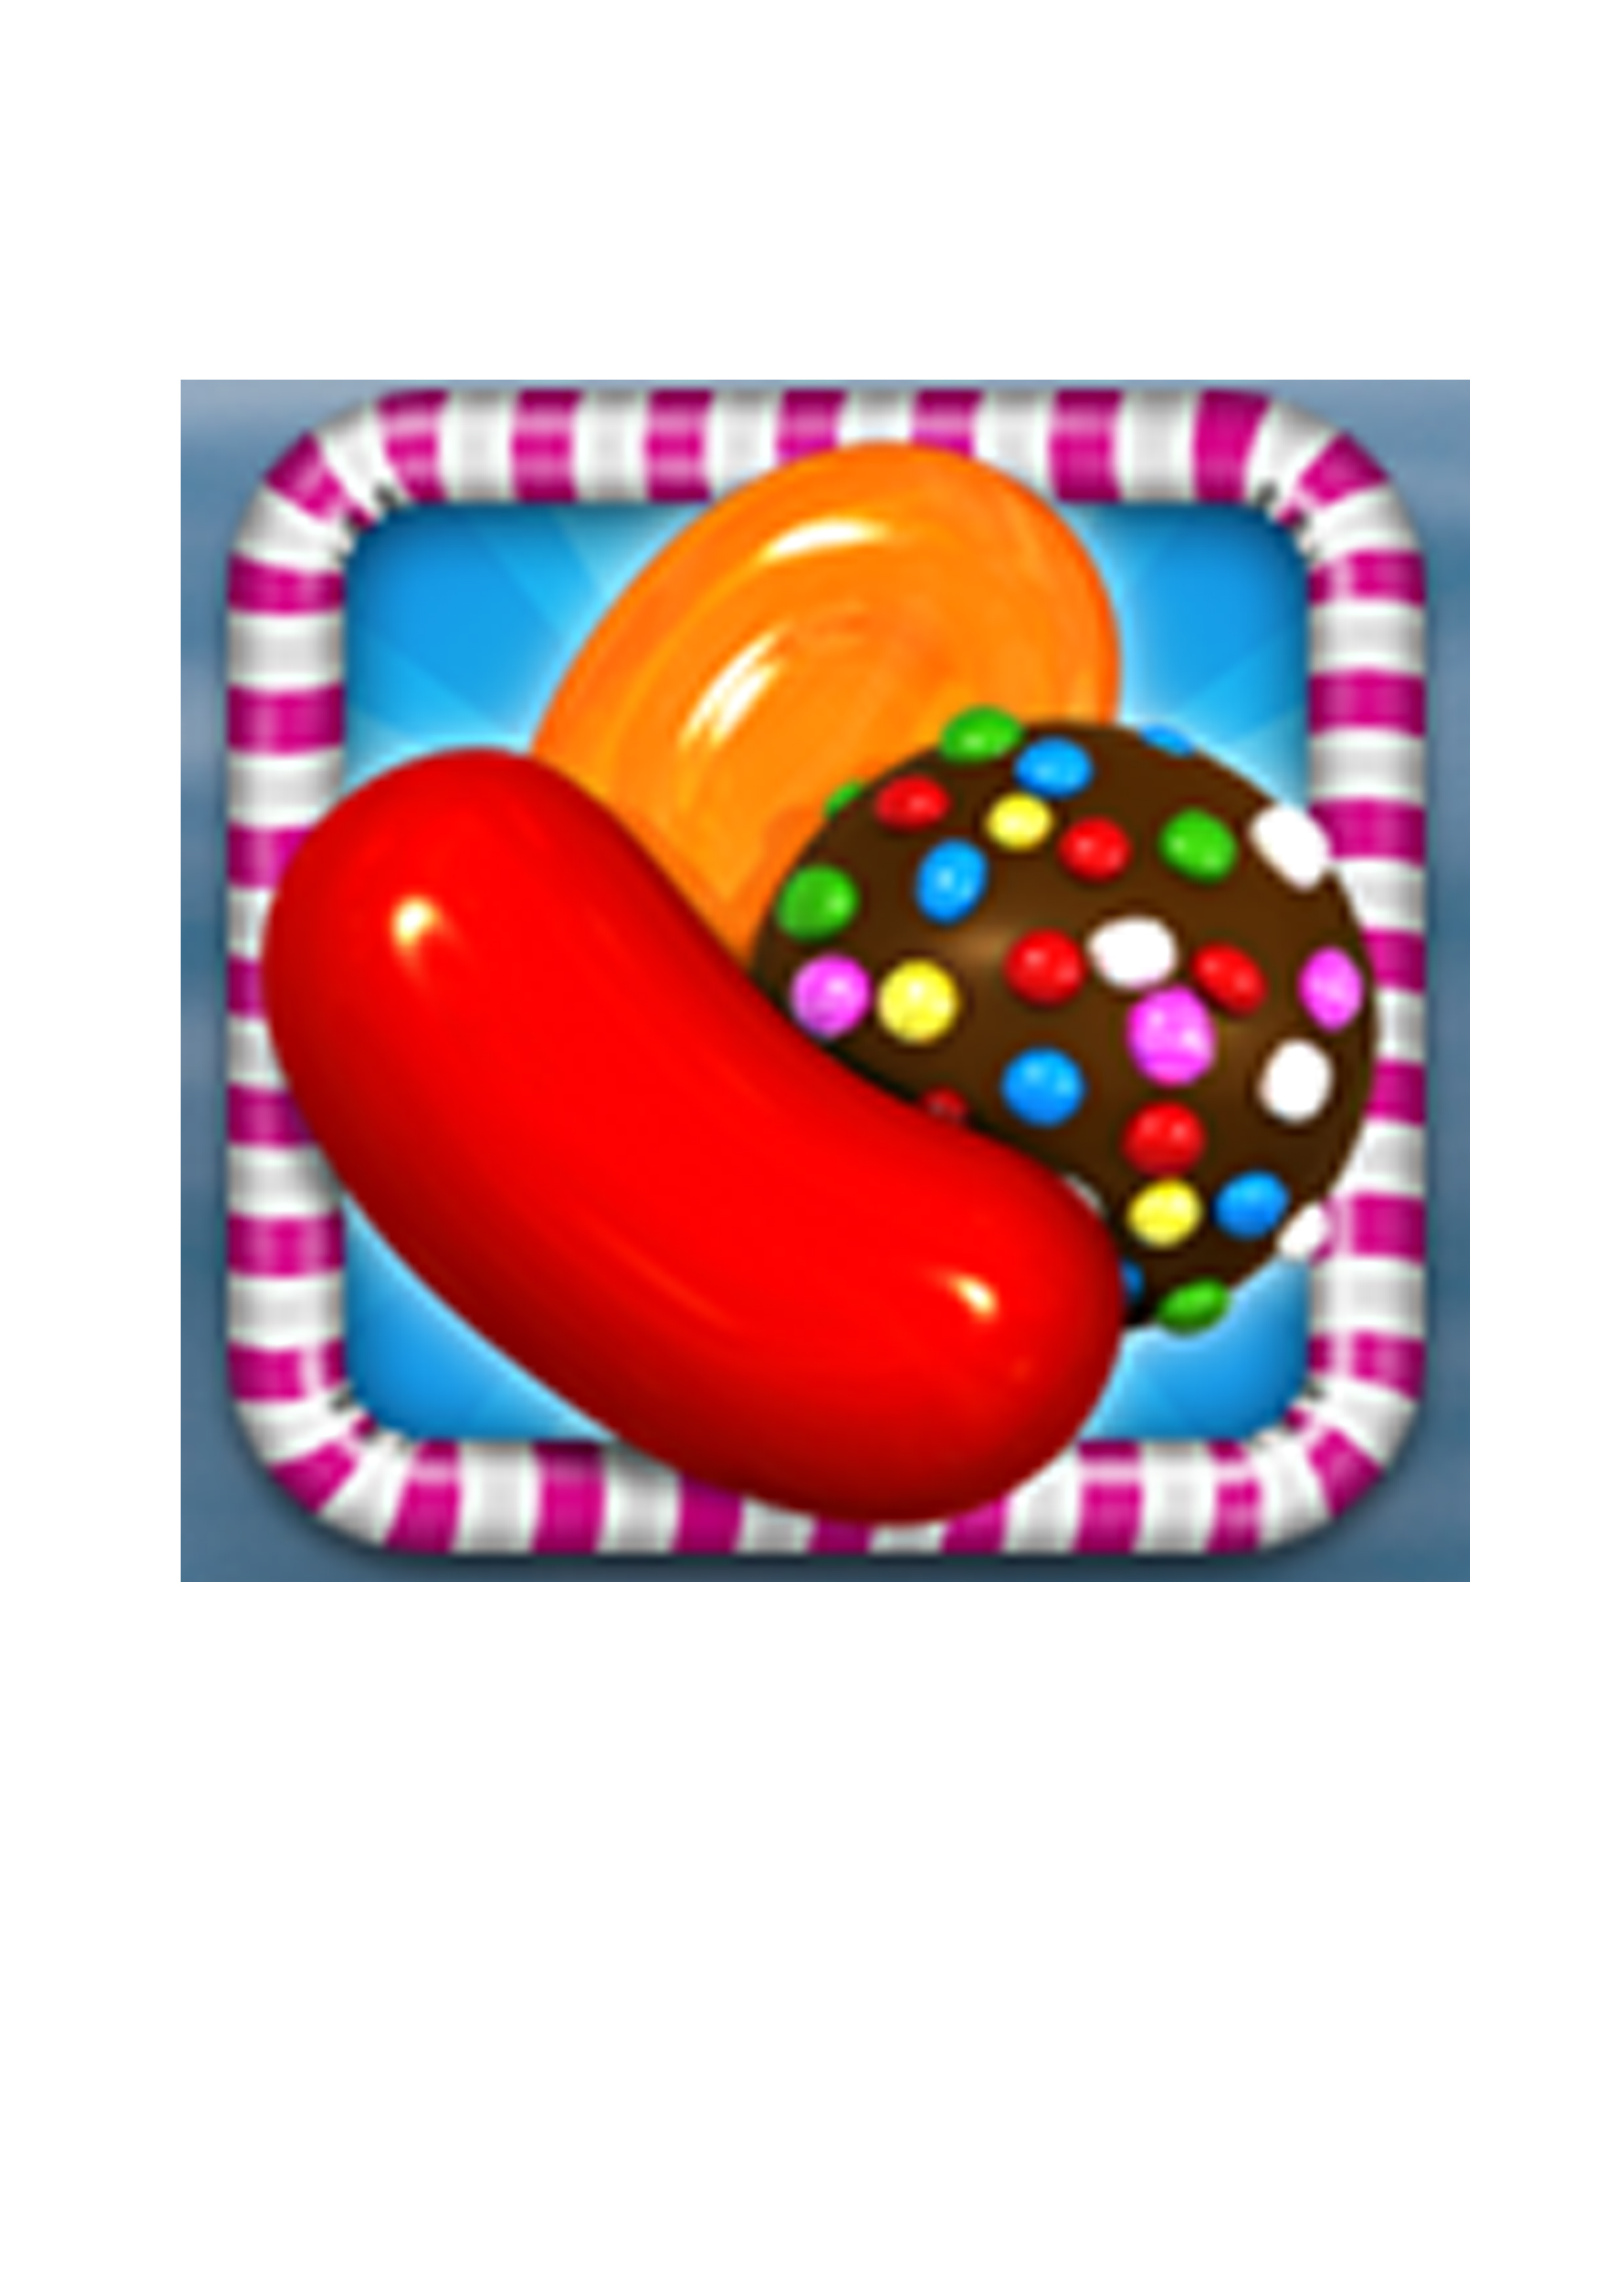 Candy Crush Icon at Vectorified.com | Collection of Candy Crush Icon